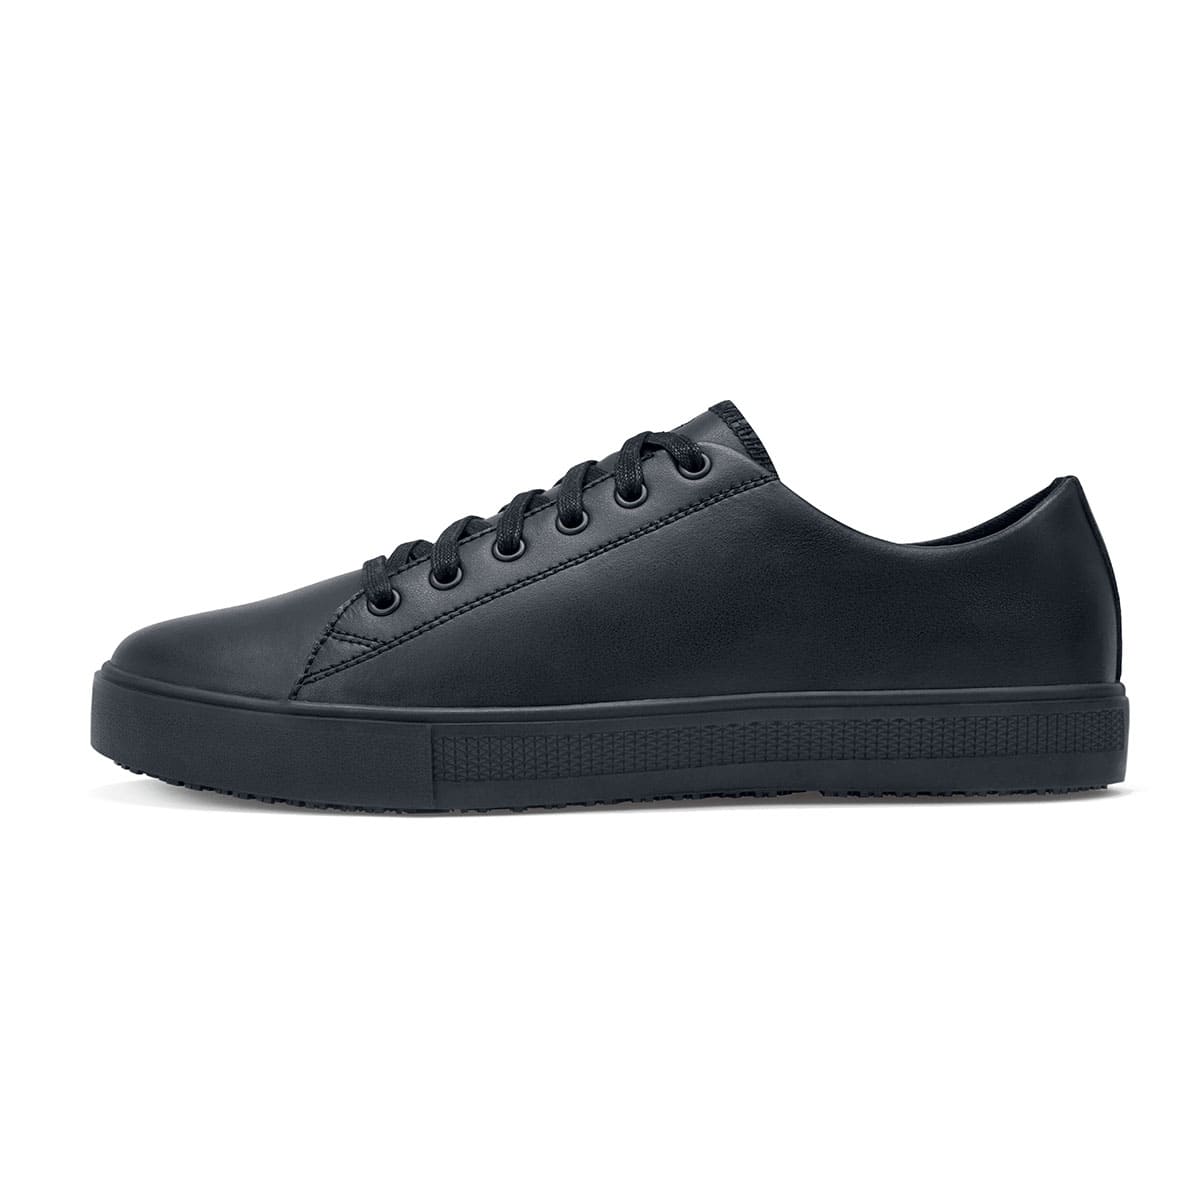 The Old School Low-Rider Black Gladiator Outsole from Shoes For Crews is a slip resistant lace-up shoe designed to provide confort throughout the day, seen from the left.